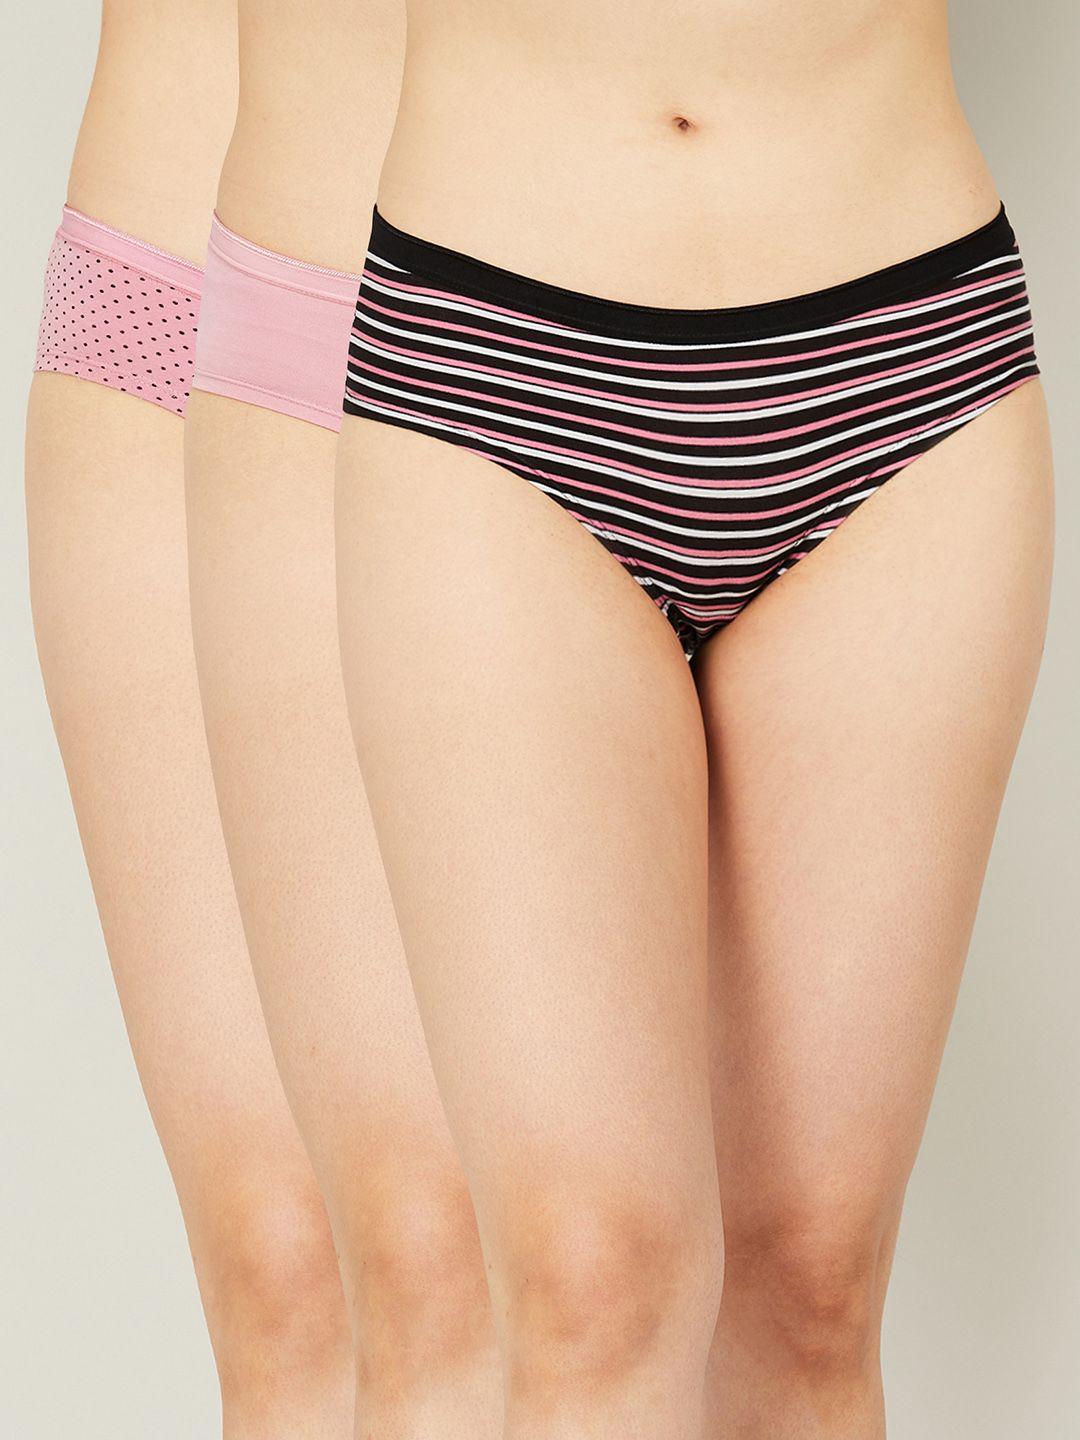 ginger-by-lifestyle-women-pink-&-black-striped-hipster-briefs-pack-of-3